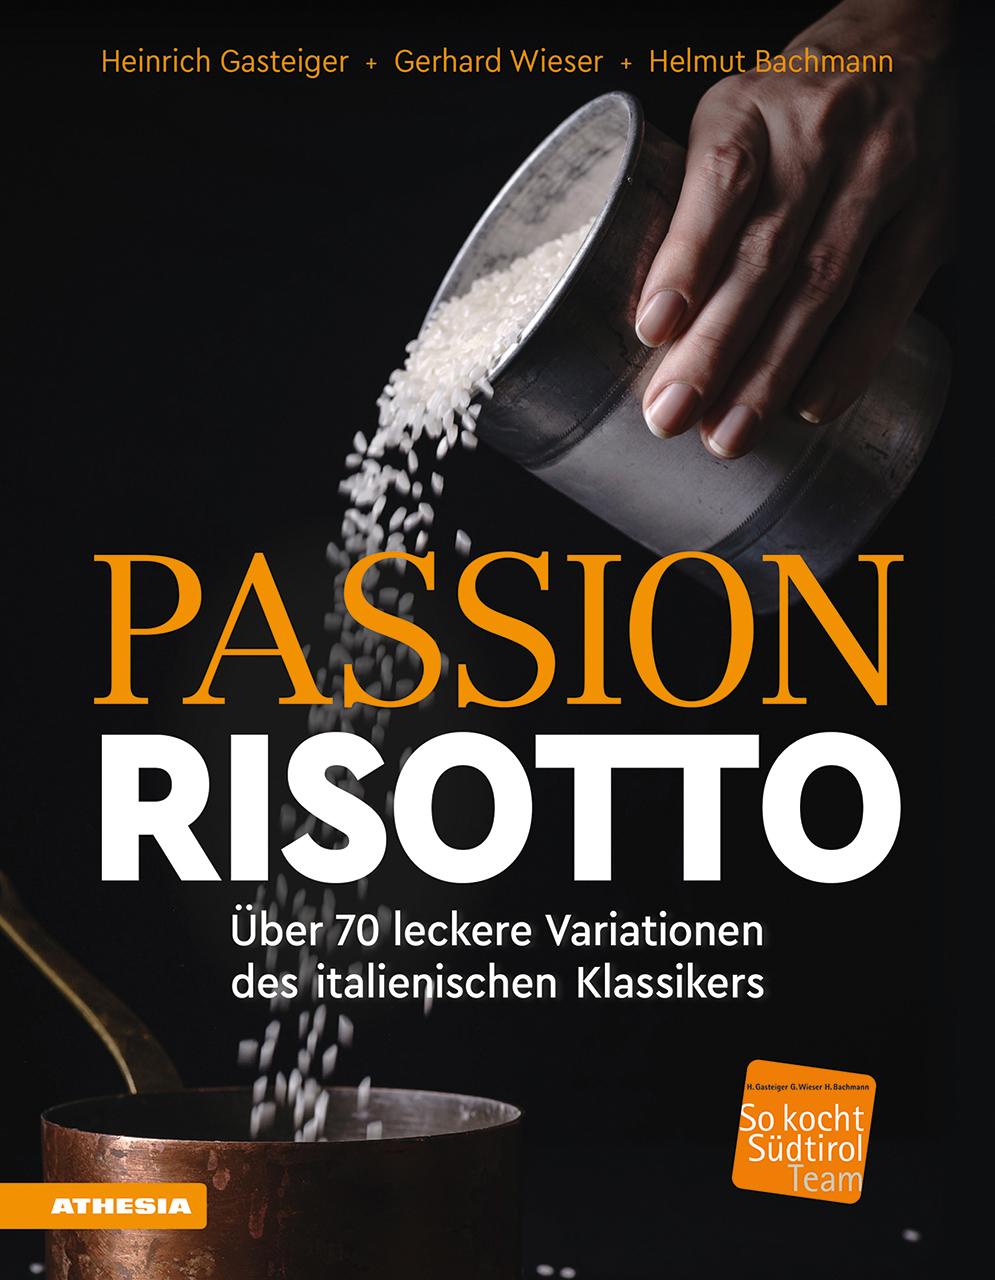 Book Passion Risotto Gerhard Wieser